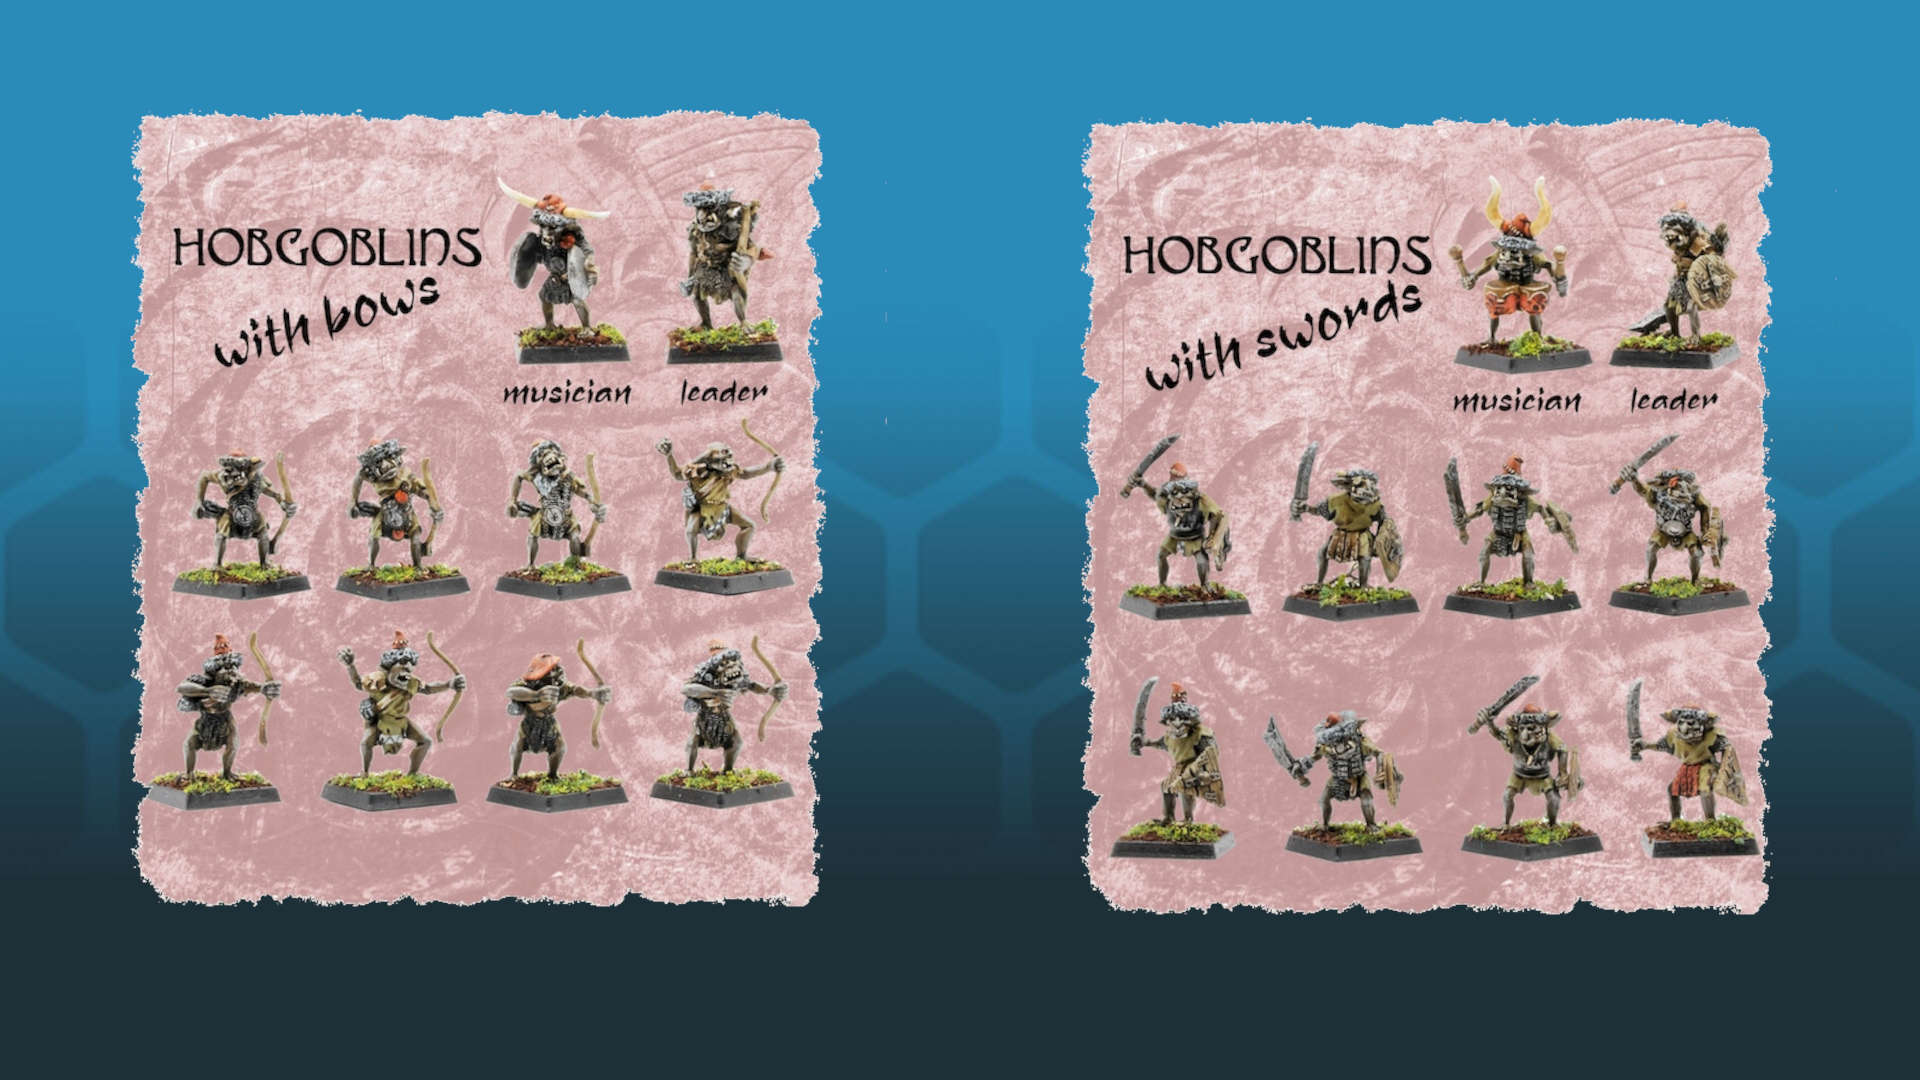 80s Warhammer inspired hobgoblin kickstarter by Oakbound Studio - two details pages of individual miniatures